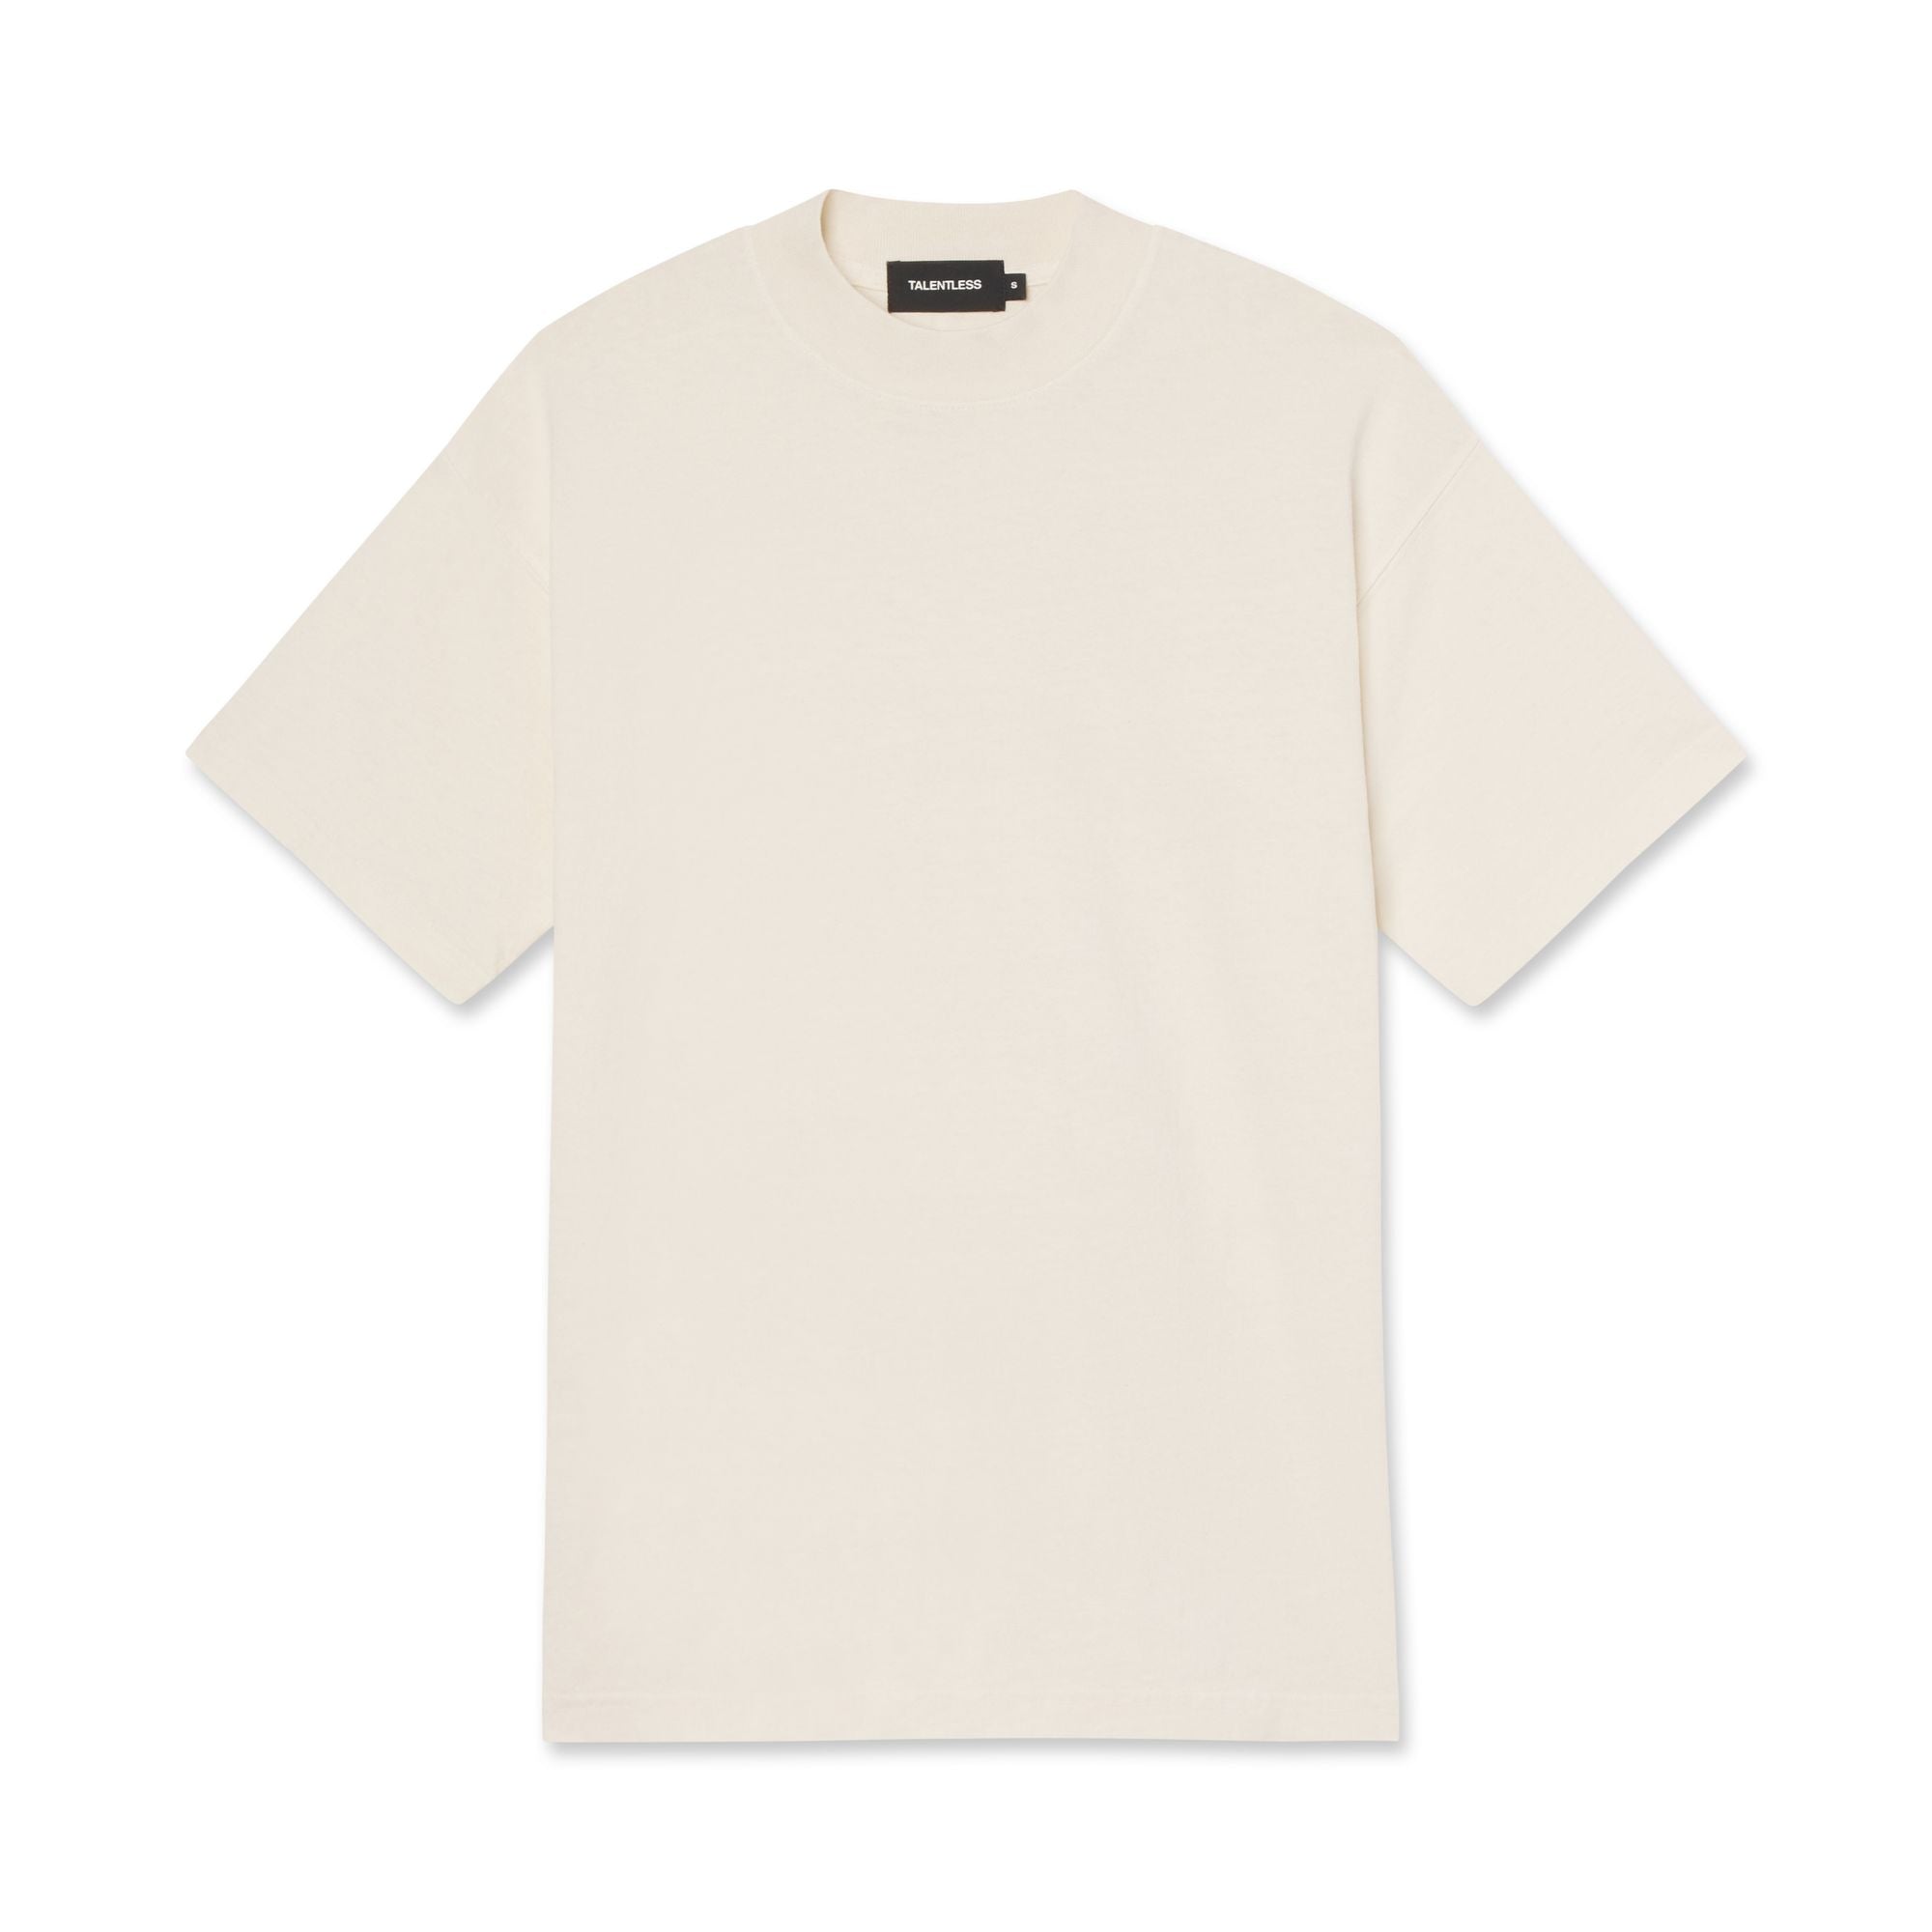 Oversized Mock Neck Tee BY230, Men's Plain cotton T-shirt with dropped  shoulders